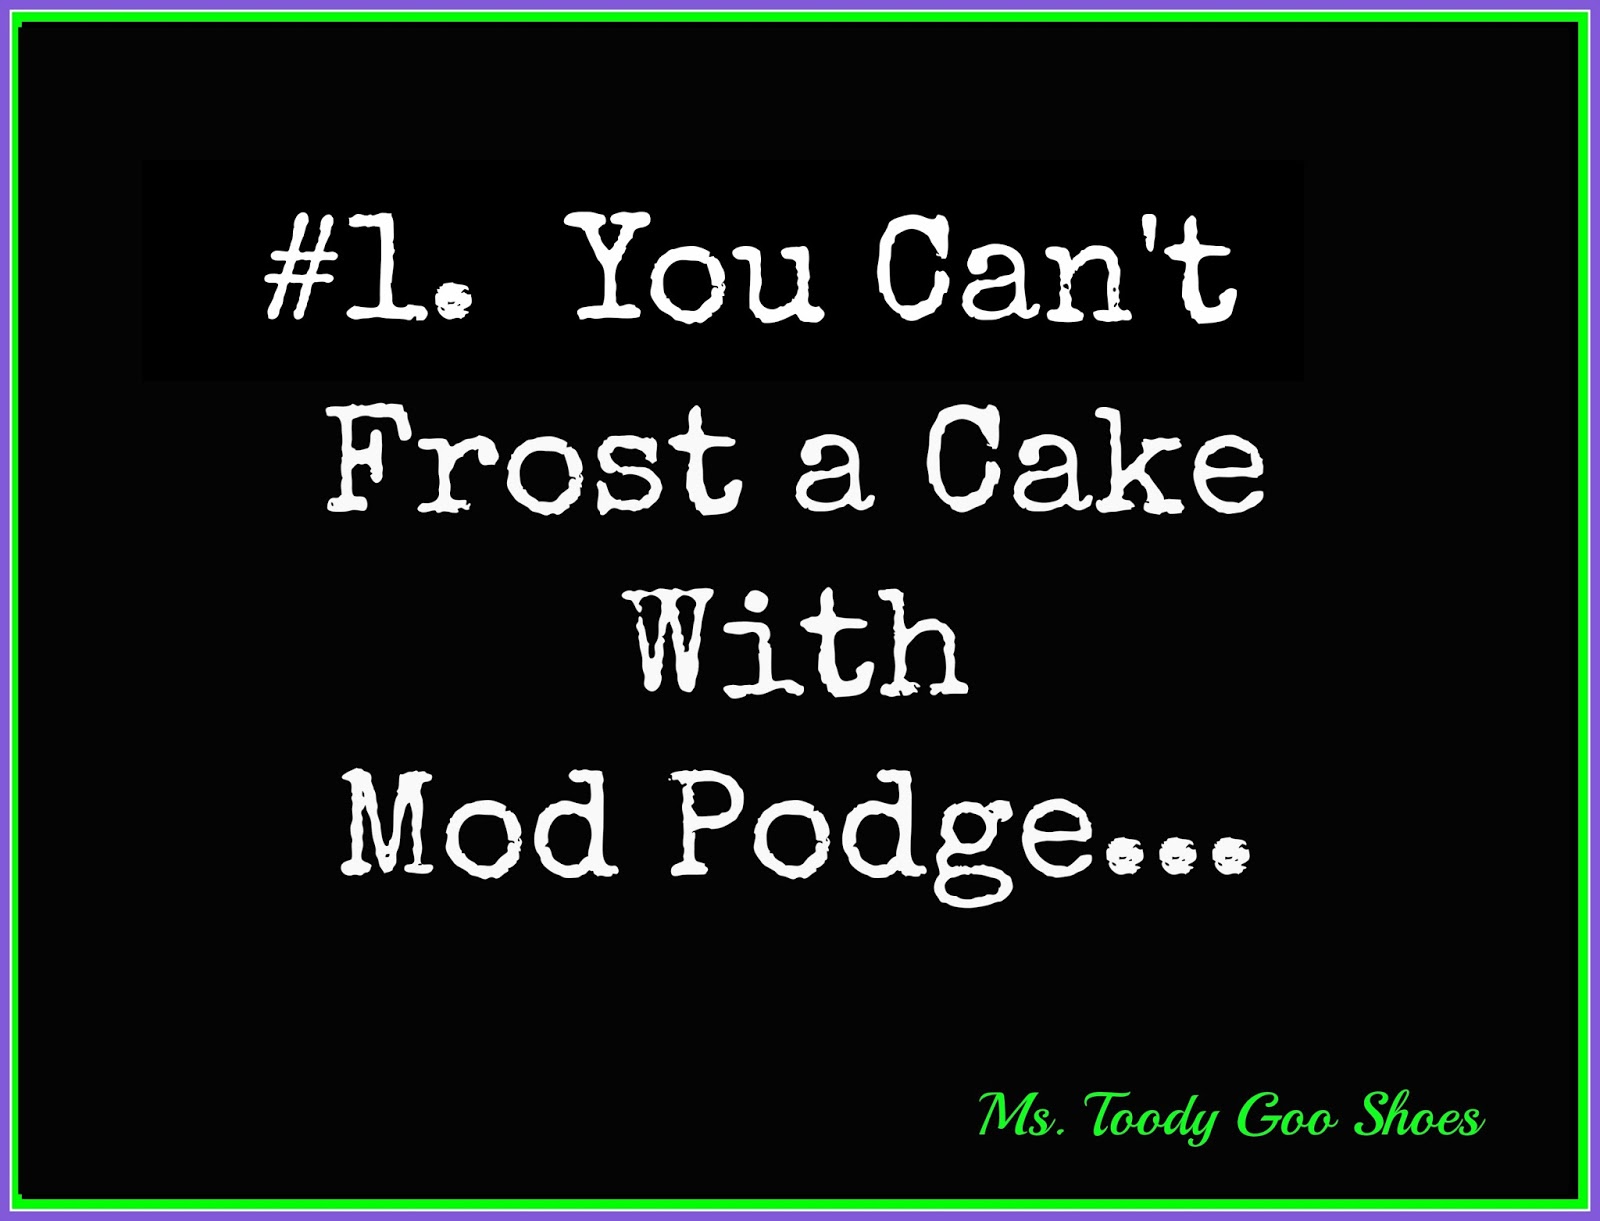 You Can't Frost A Cake You Can't Frost A Cake With Mod Podge: Things I've Learned From Blogging by Ms. Toody Goo Shoes